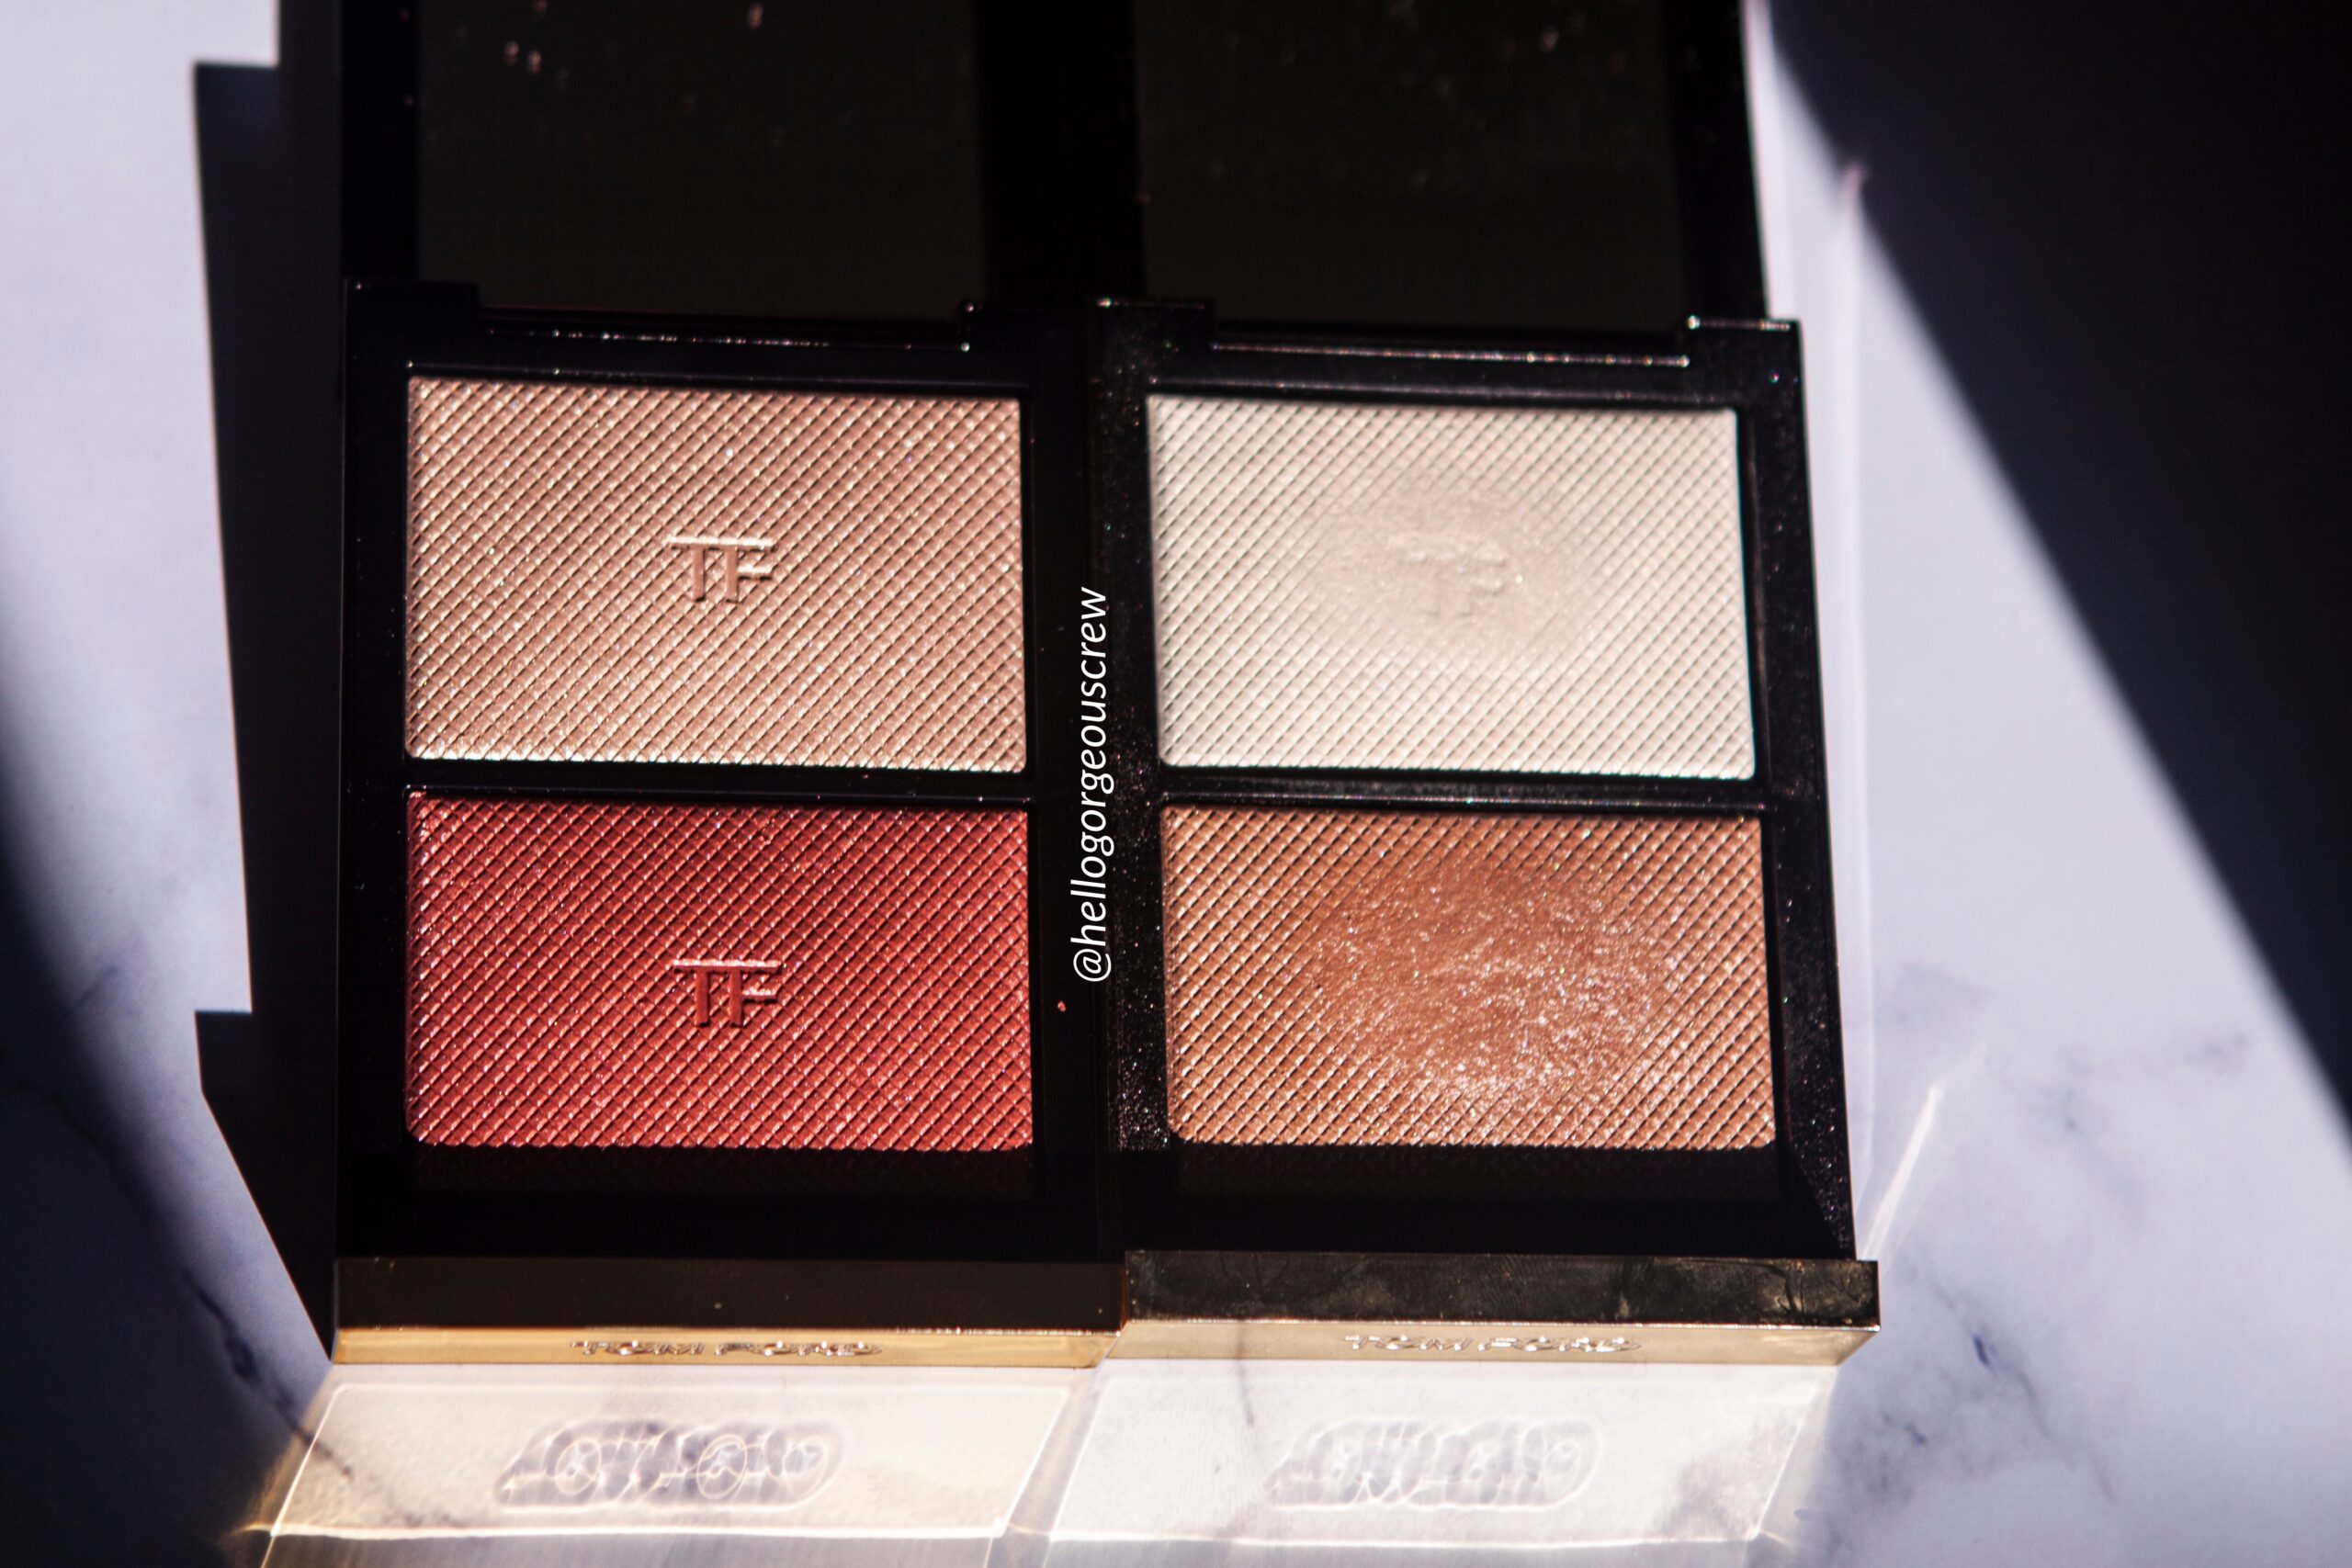 Tom Ford Skin Illuminating Powder Duo Incandescent - Is It Envy Worthy? -